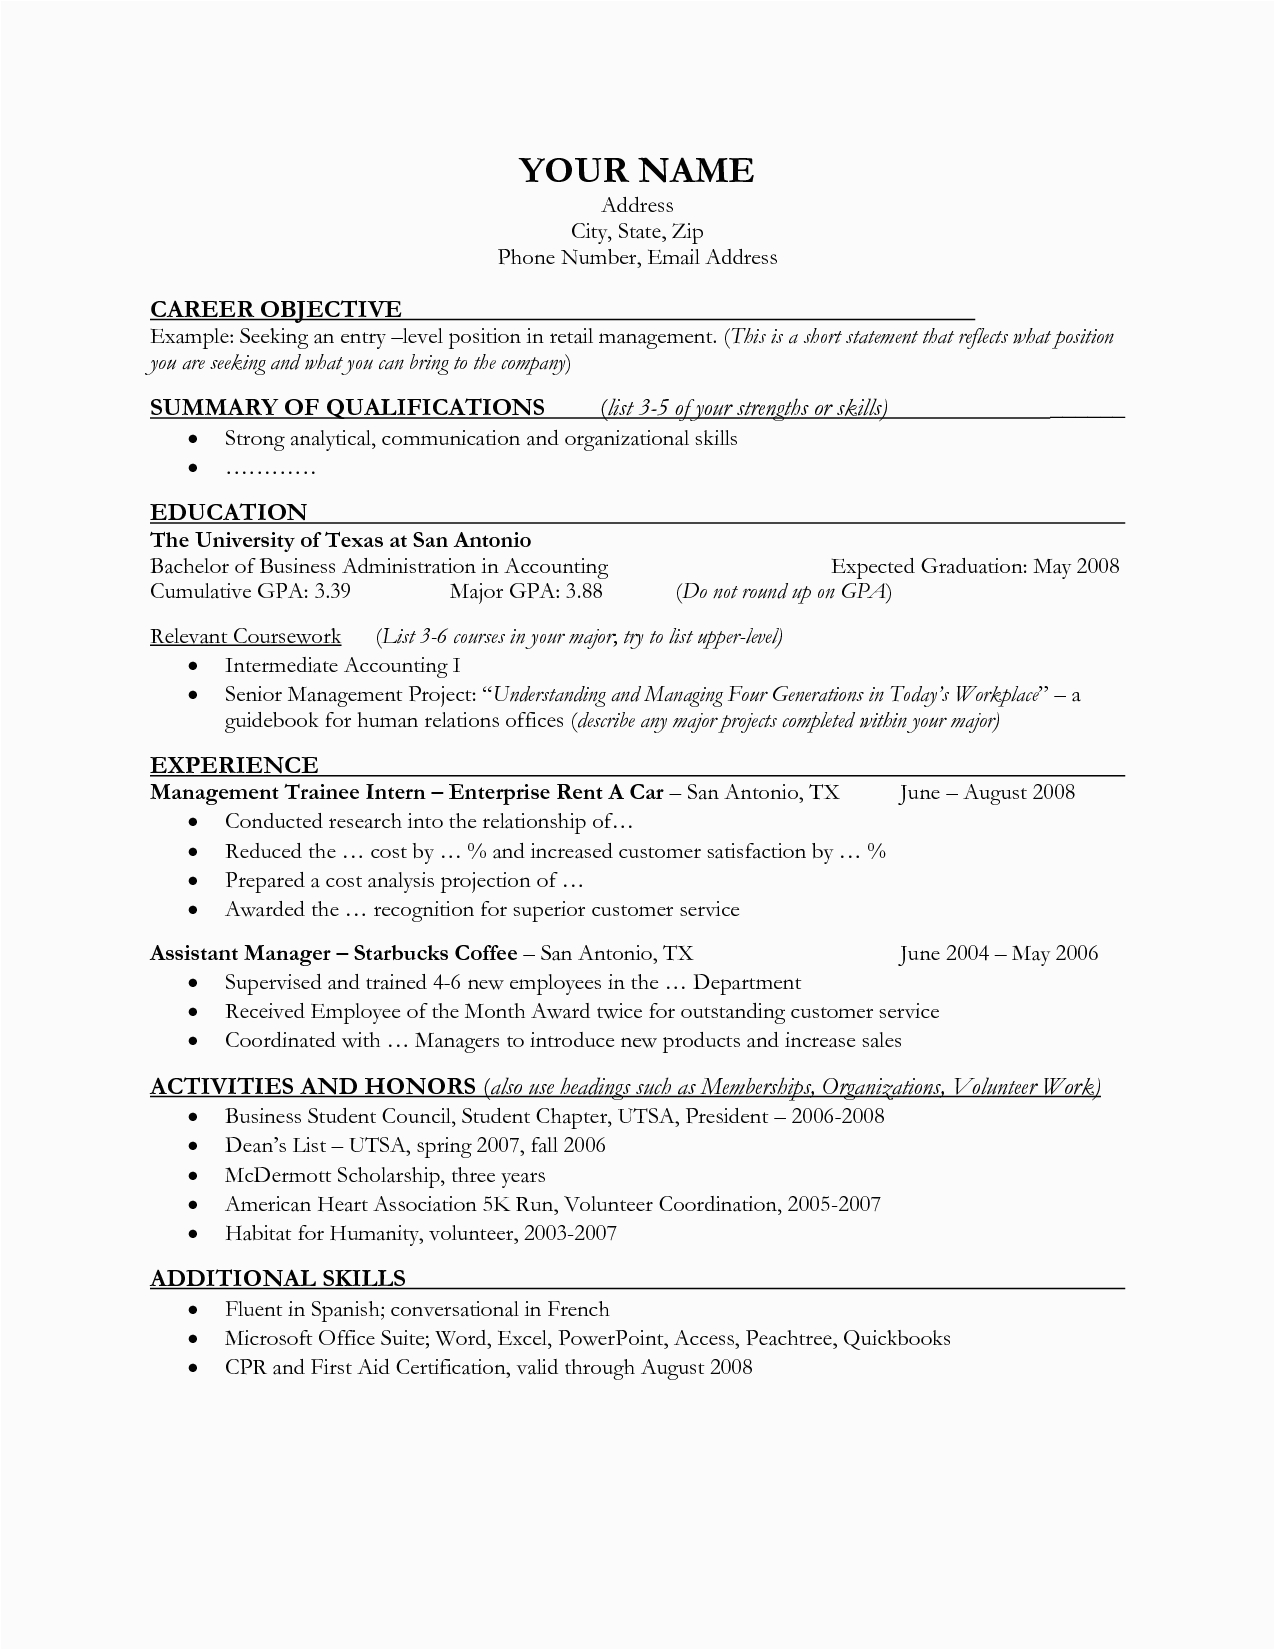 Sample Objectives for Resume In Retail Resume Objective for Retail